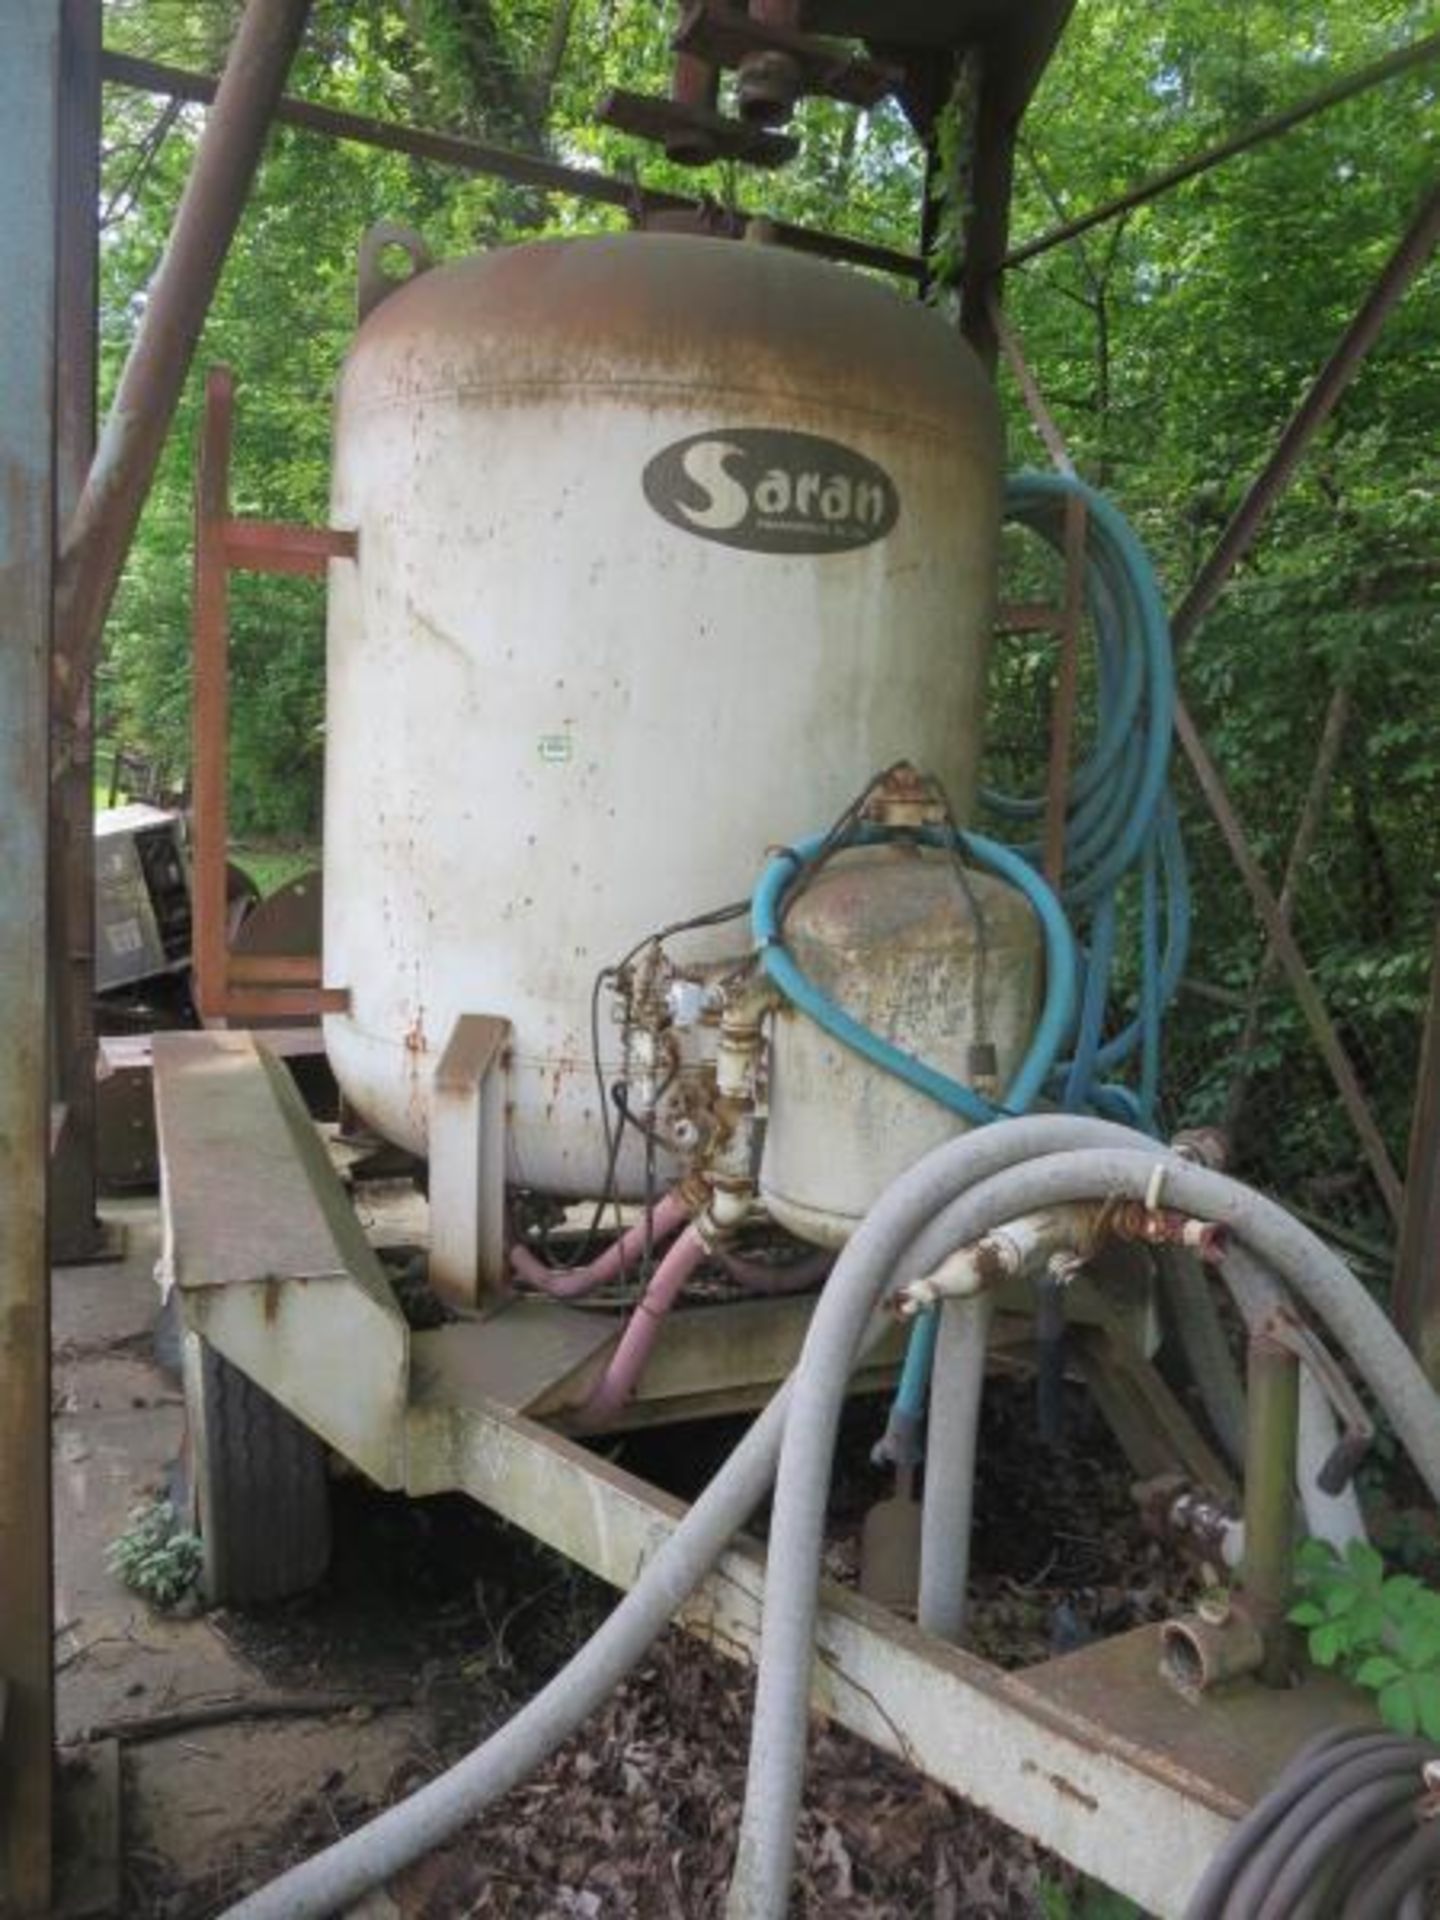 Schmidt Mounted Pressure Pot. Mounted On Dual Axle Trailer, Tank Approx. 67"h x 60"dia. Hit #